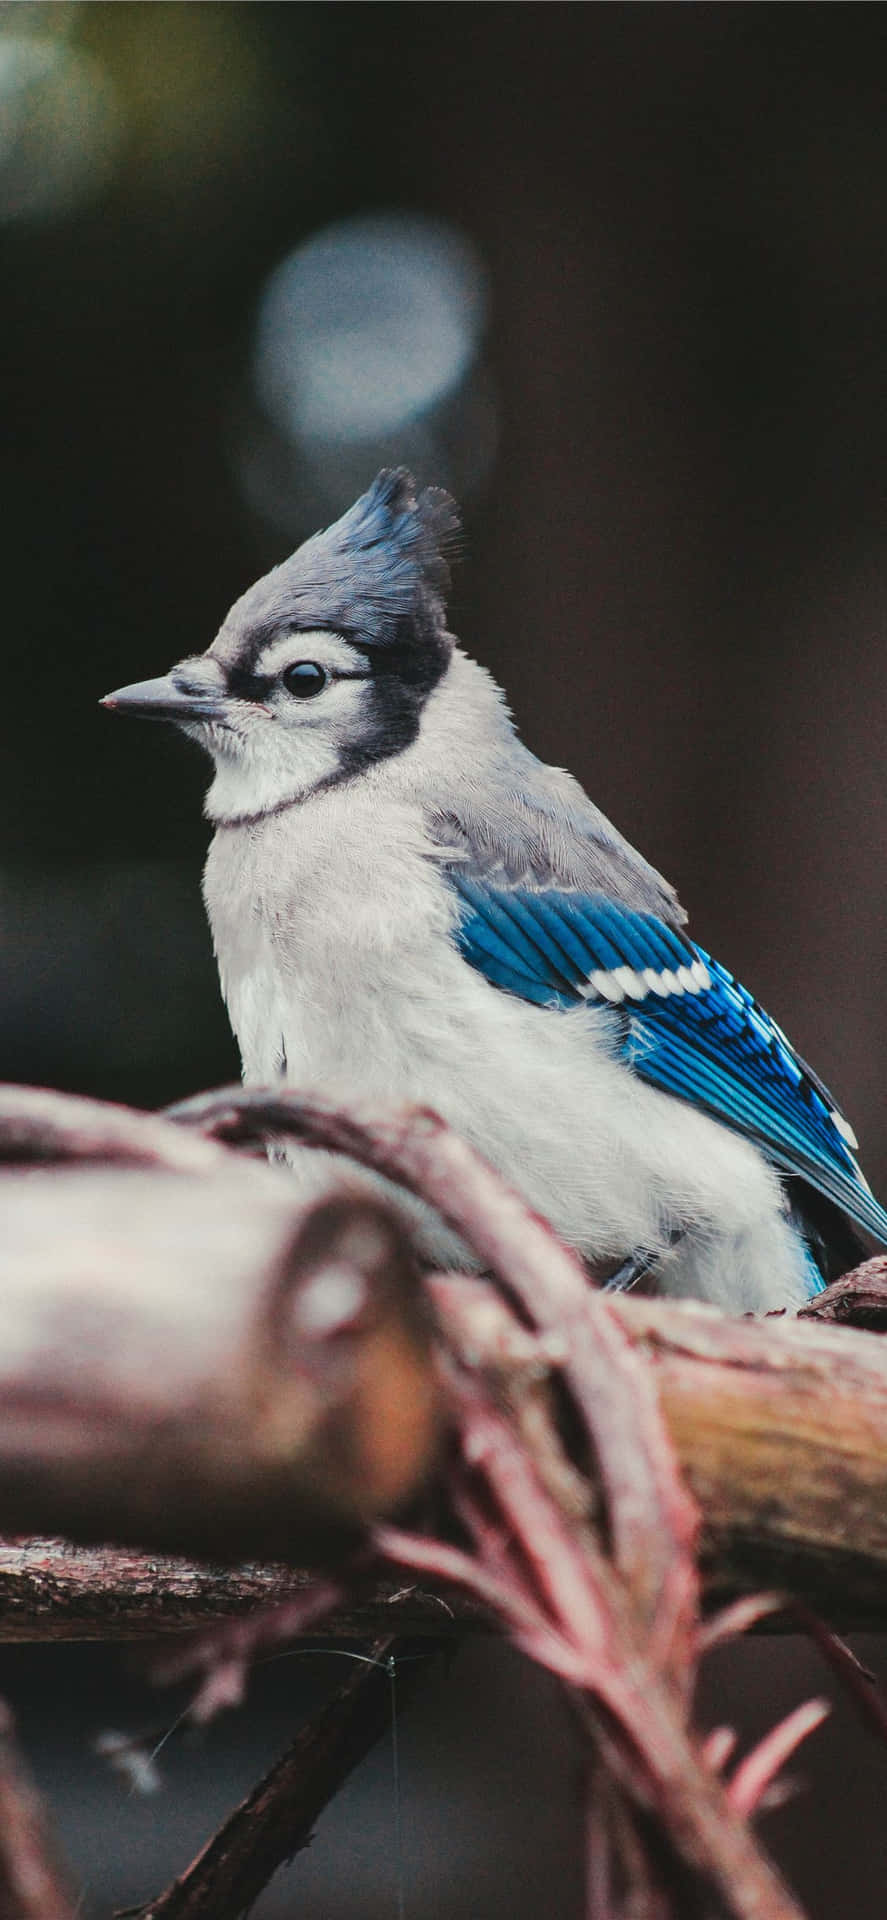 A brilliant blue jay standing atop a branch, overlooking its surroundings.